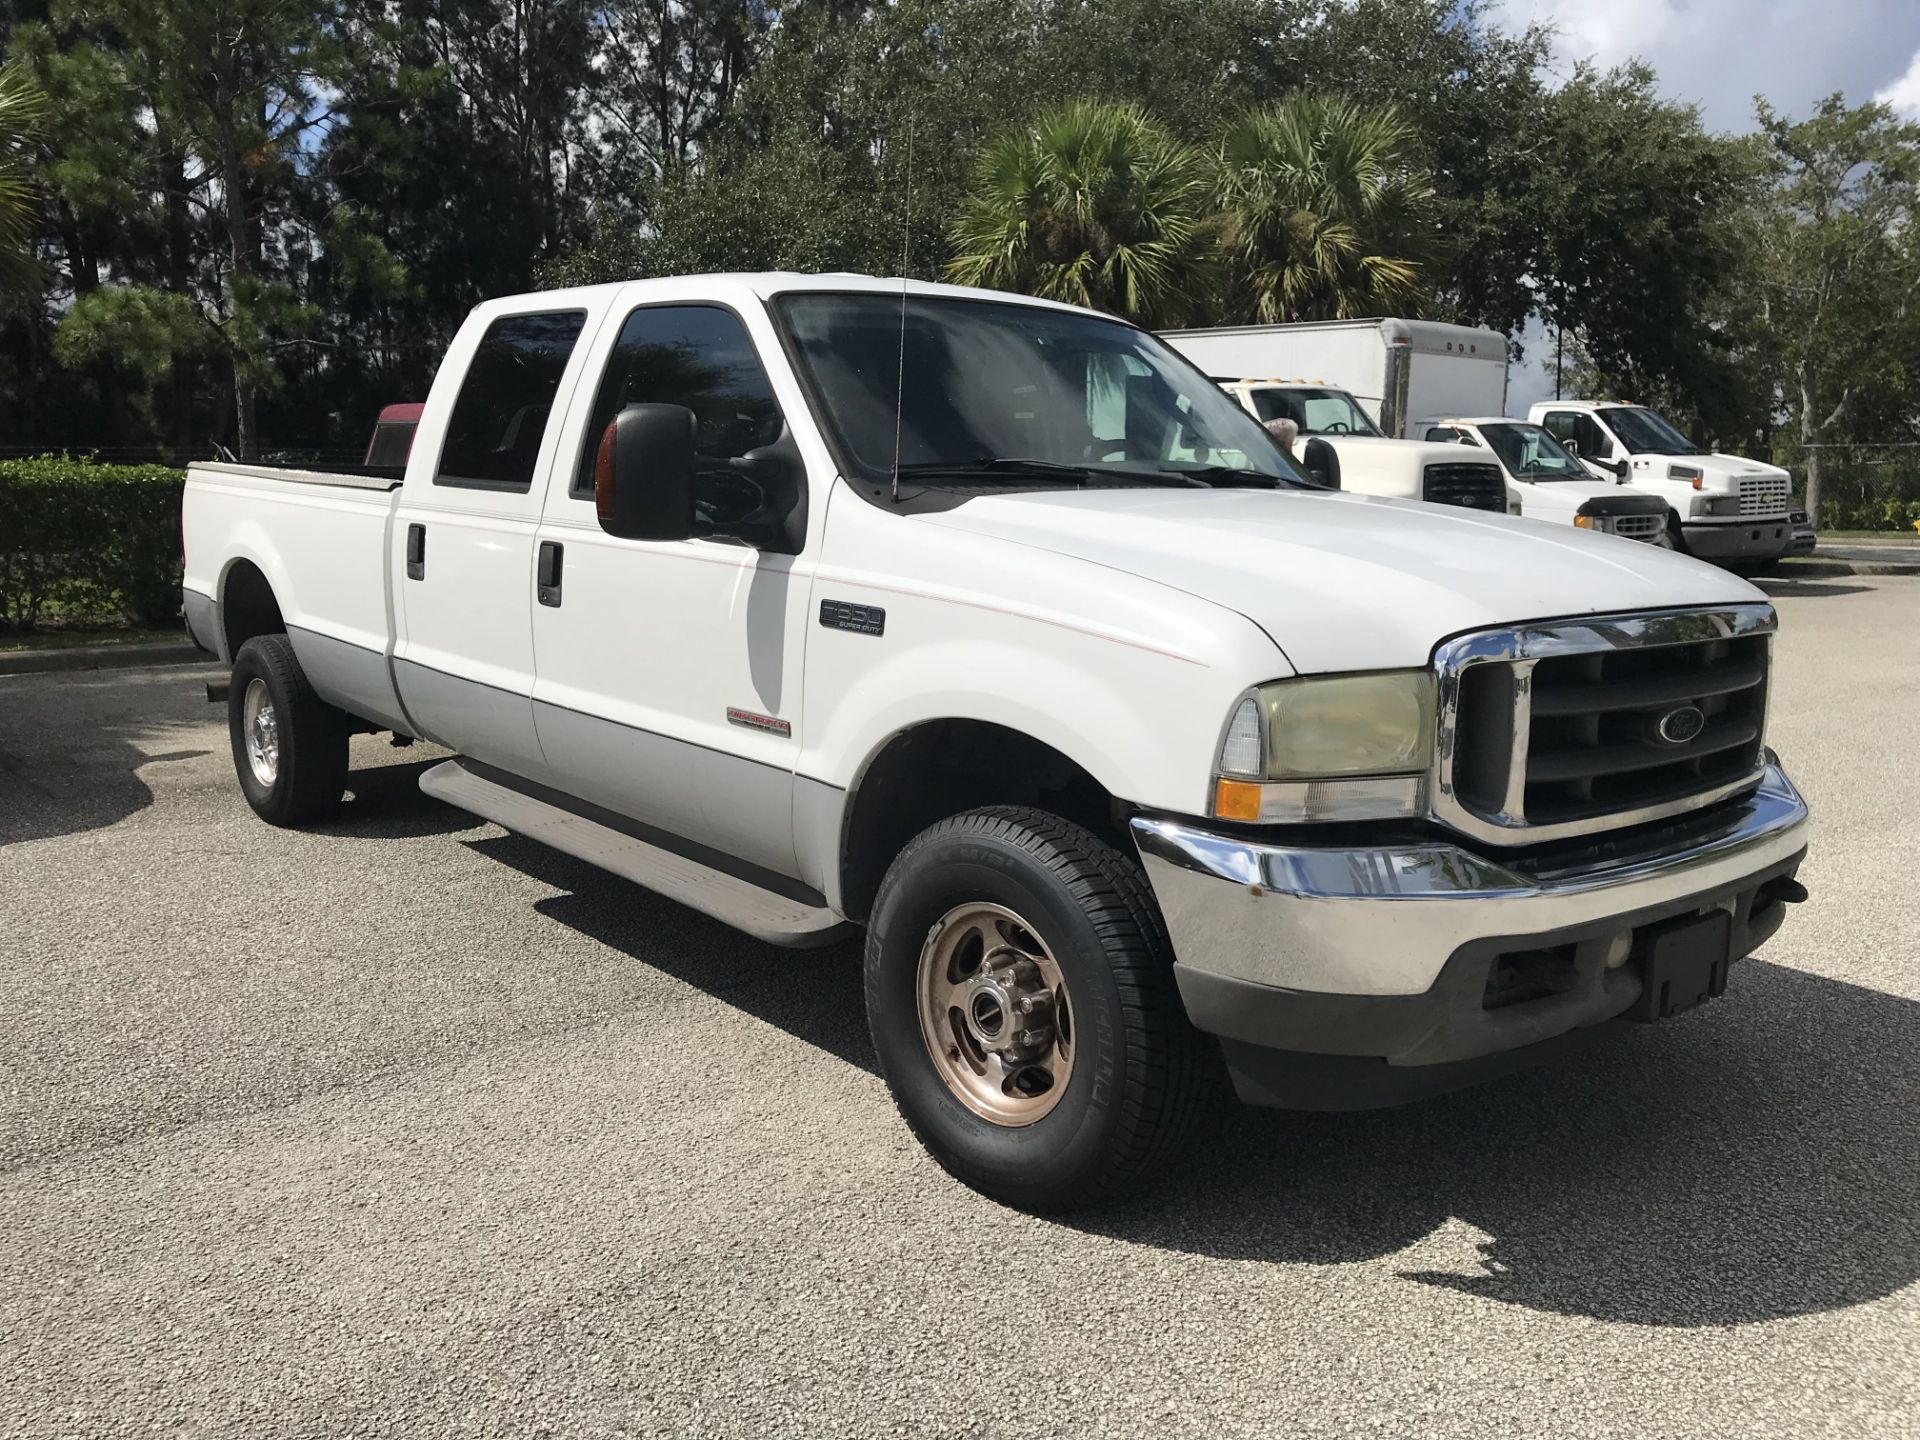 2004 FORD F350 CREW CAB 4-WHEEL DRIVE PICK UP; VIN # 1FTSW31P54EB38811, FULL 8' BED, FULL POWER, - Image 2 of 7